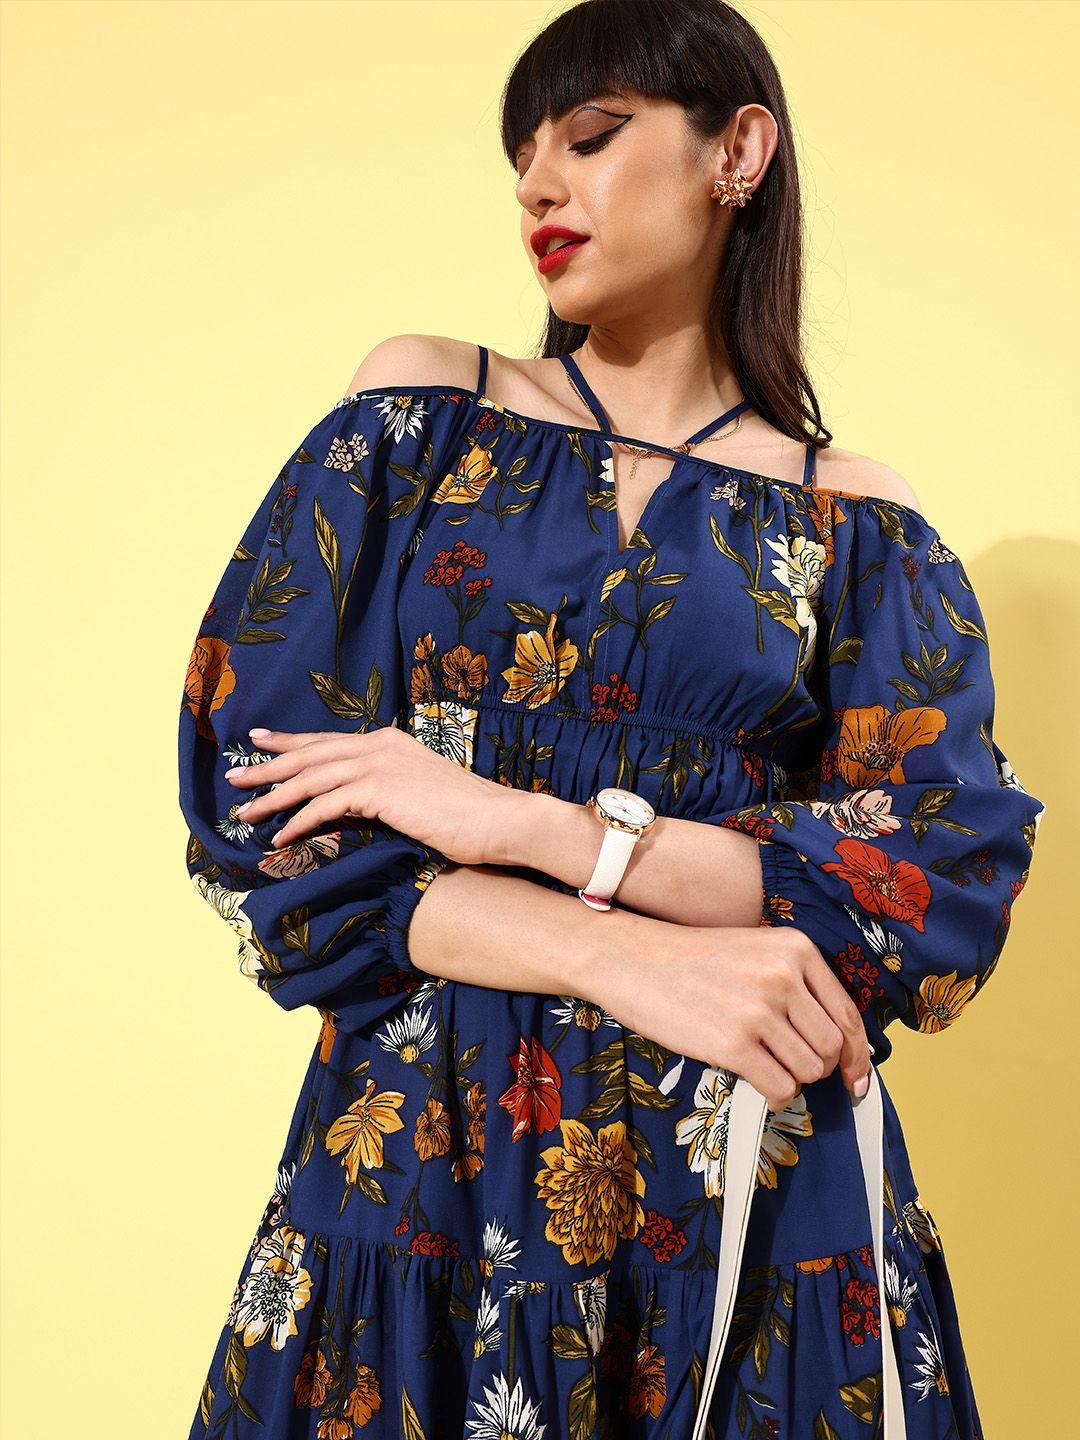 kassually-women-blue-&-mustard-yellow-floral-printed-off-shoulder-a-line-tiered-dress